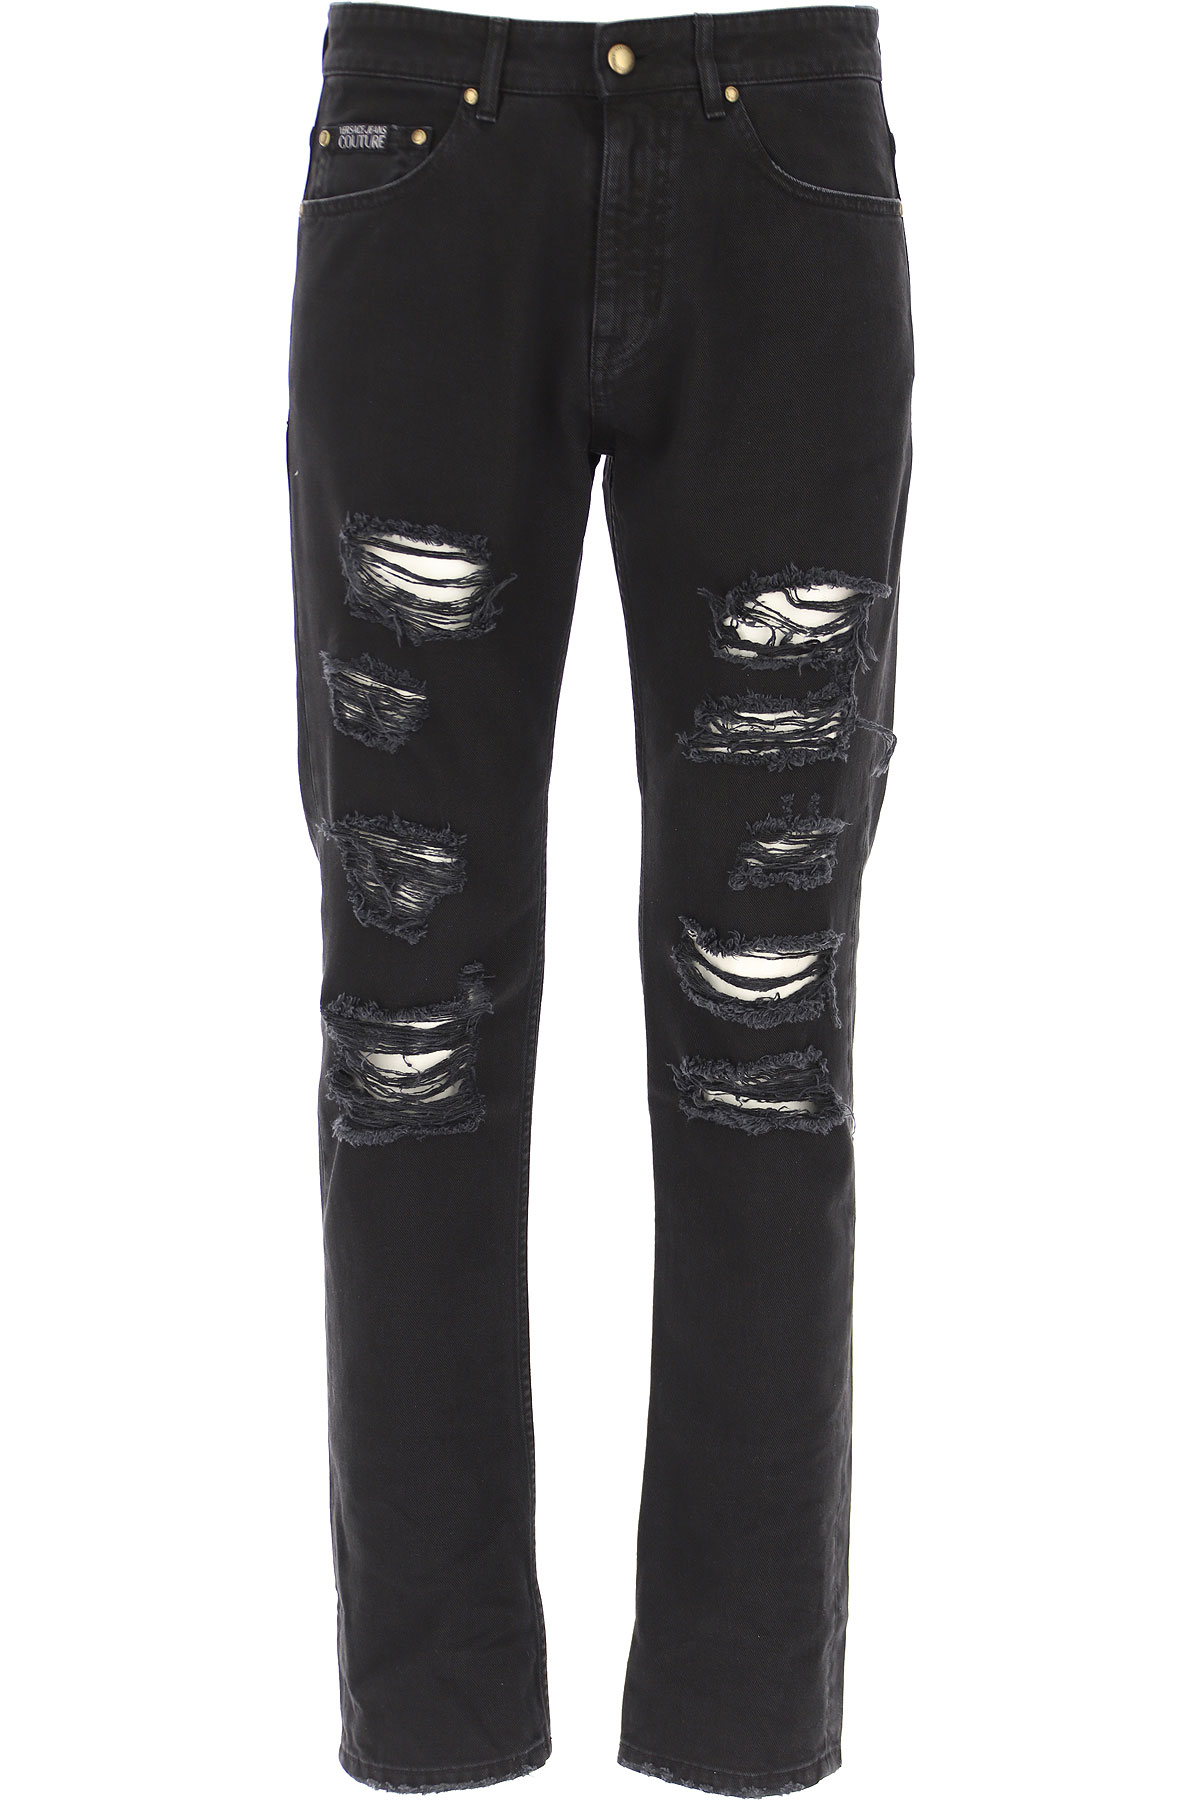 Mens Clothing Versace Jeans Couture , Style code: a2gvb0s0-vum500-899